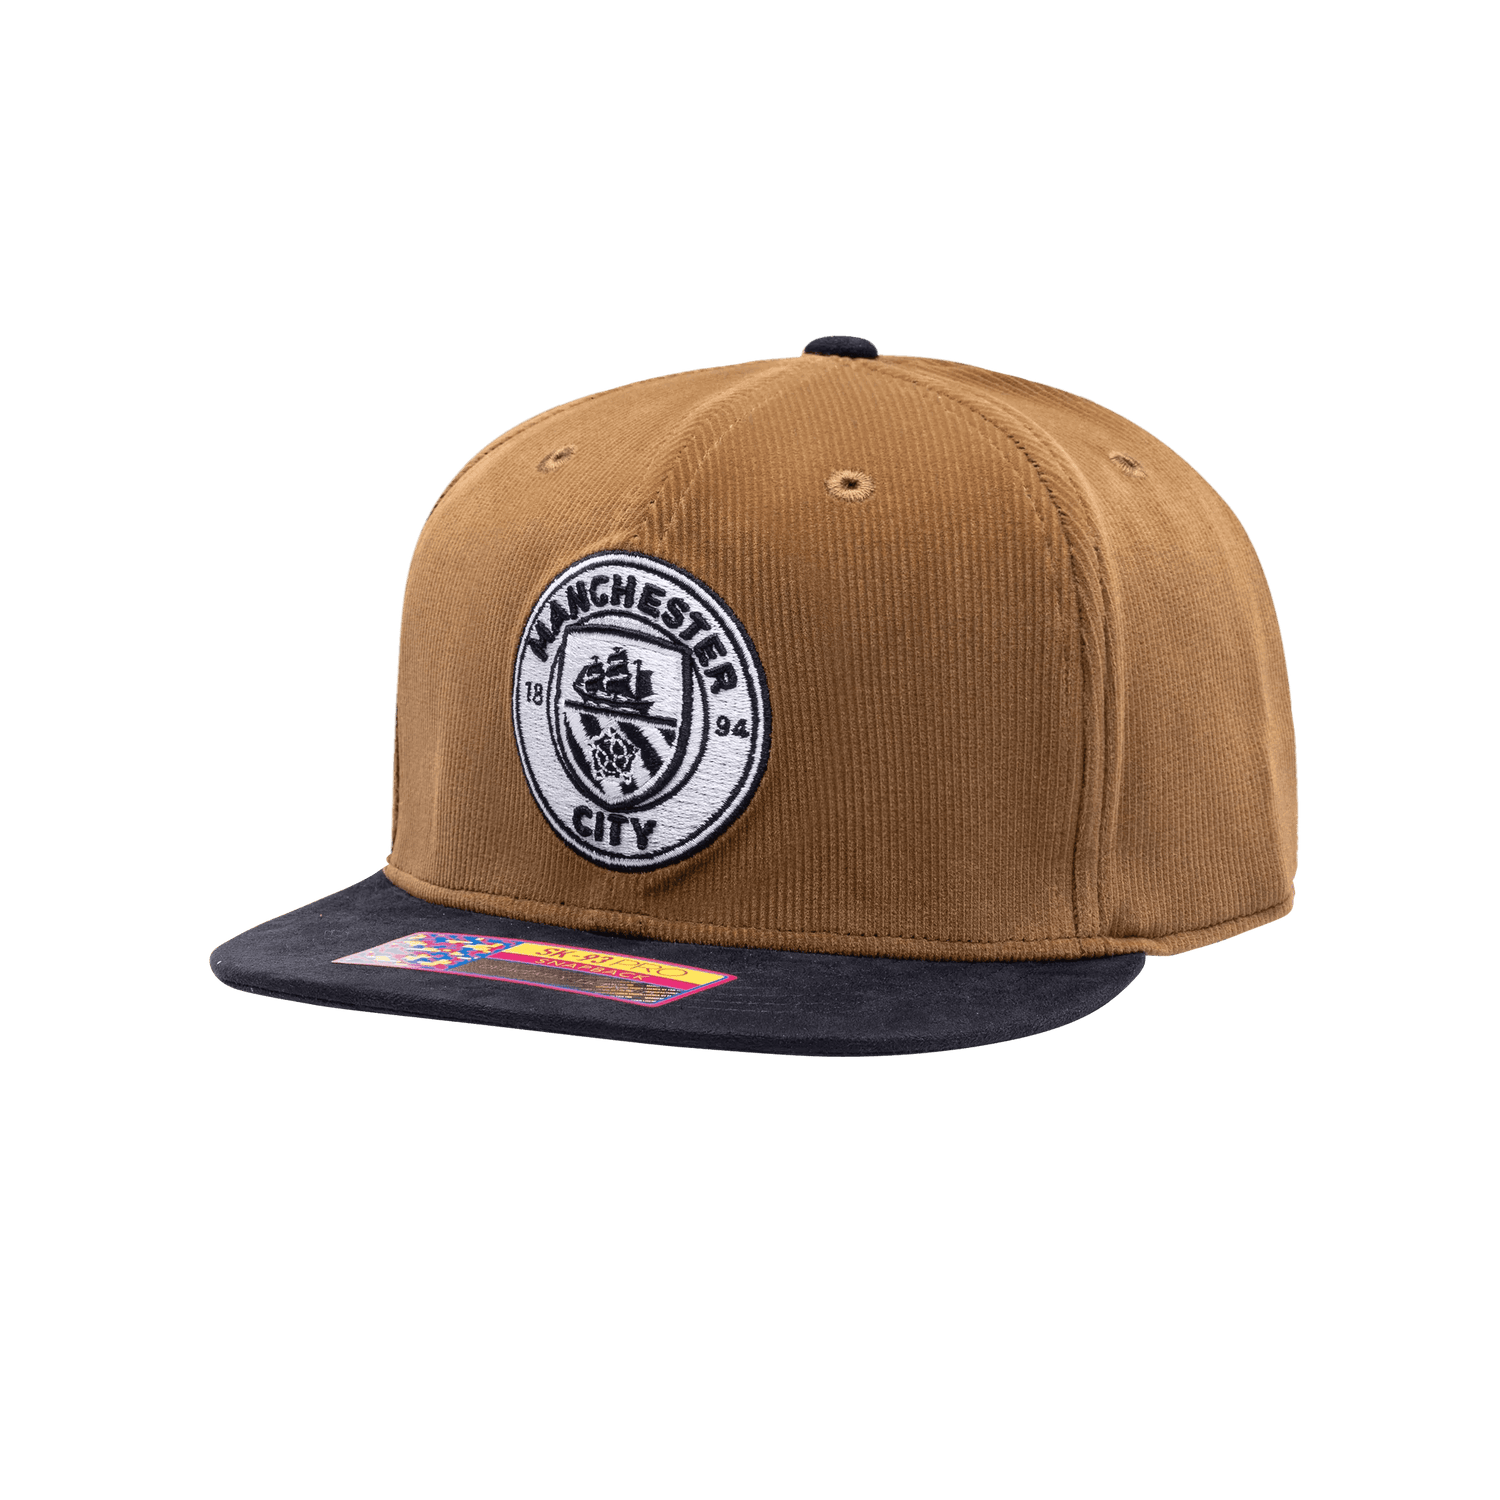 FI Collection Club Manchester City Cognac Snapback Hat (Lateral - Side 1)